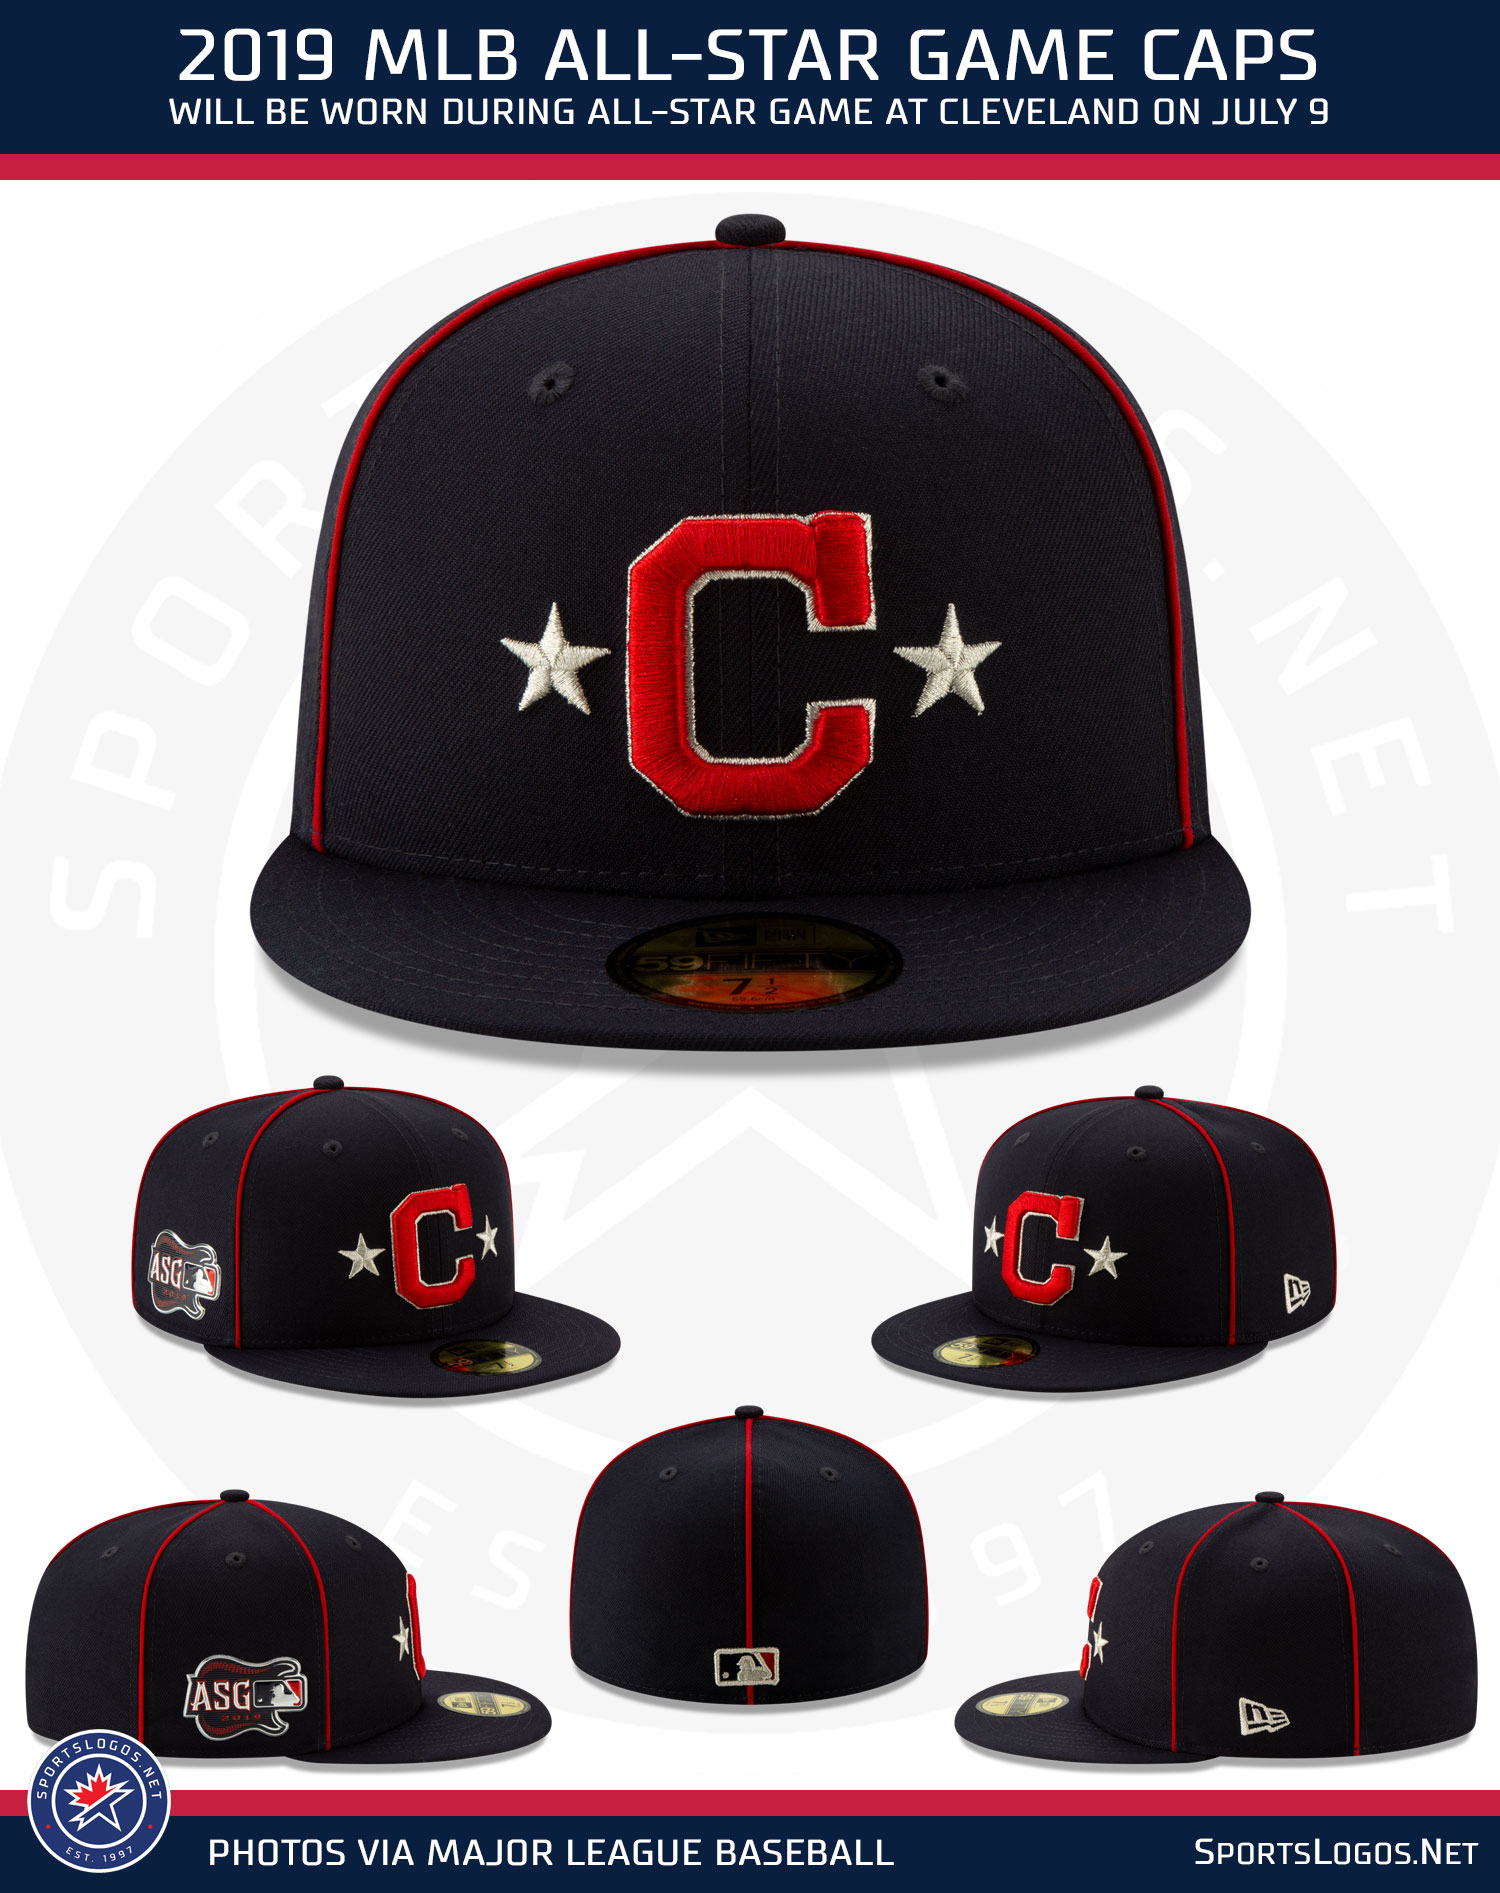 MLB Releases 2019 Holiday Caps